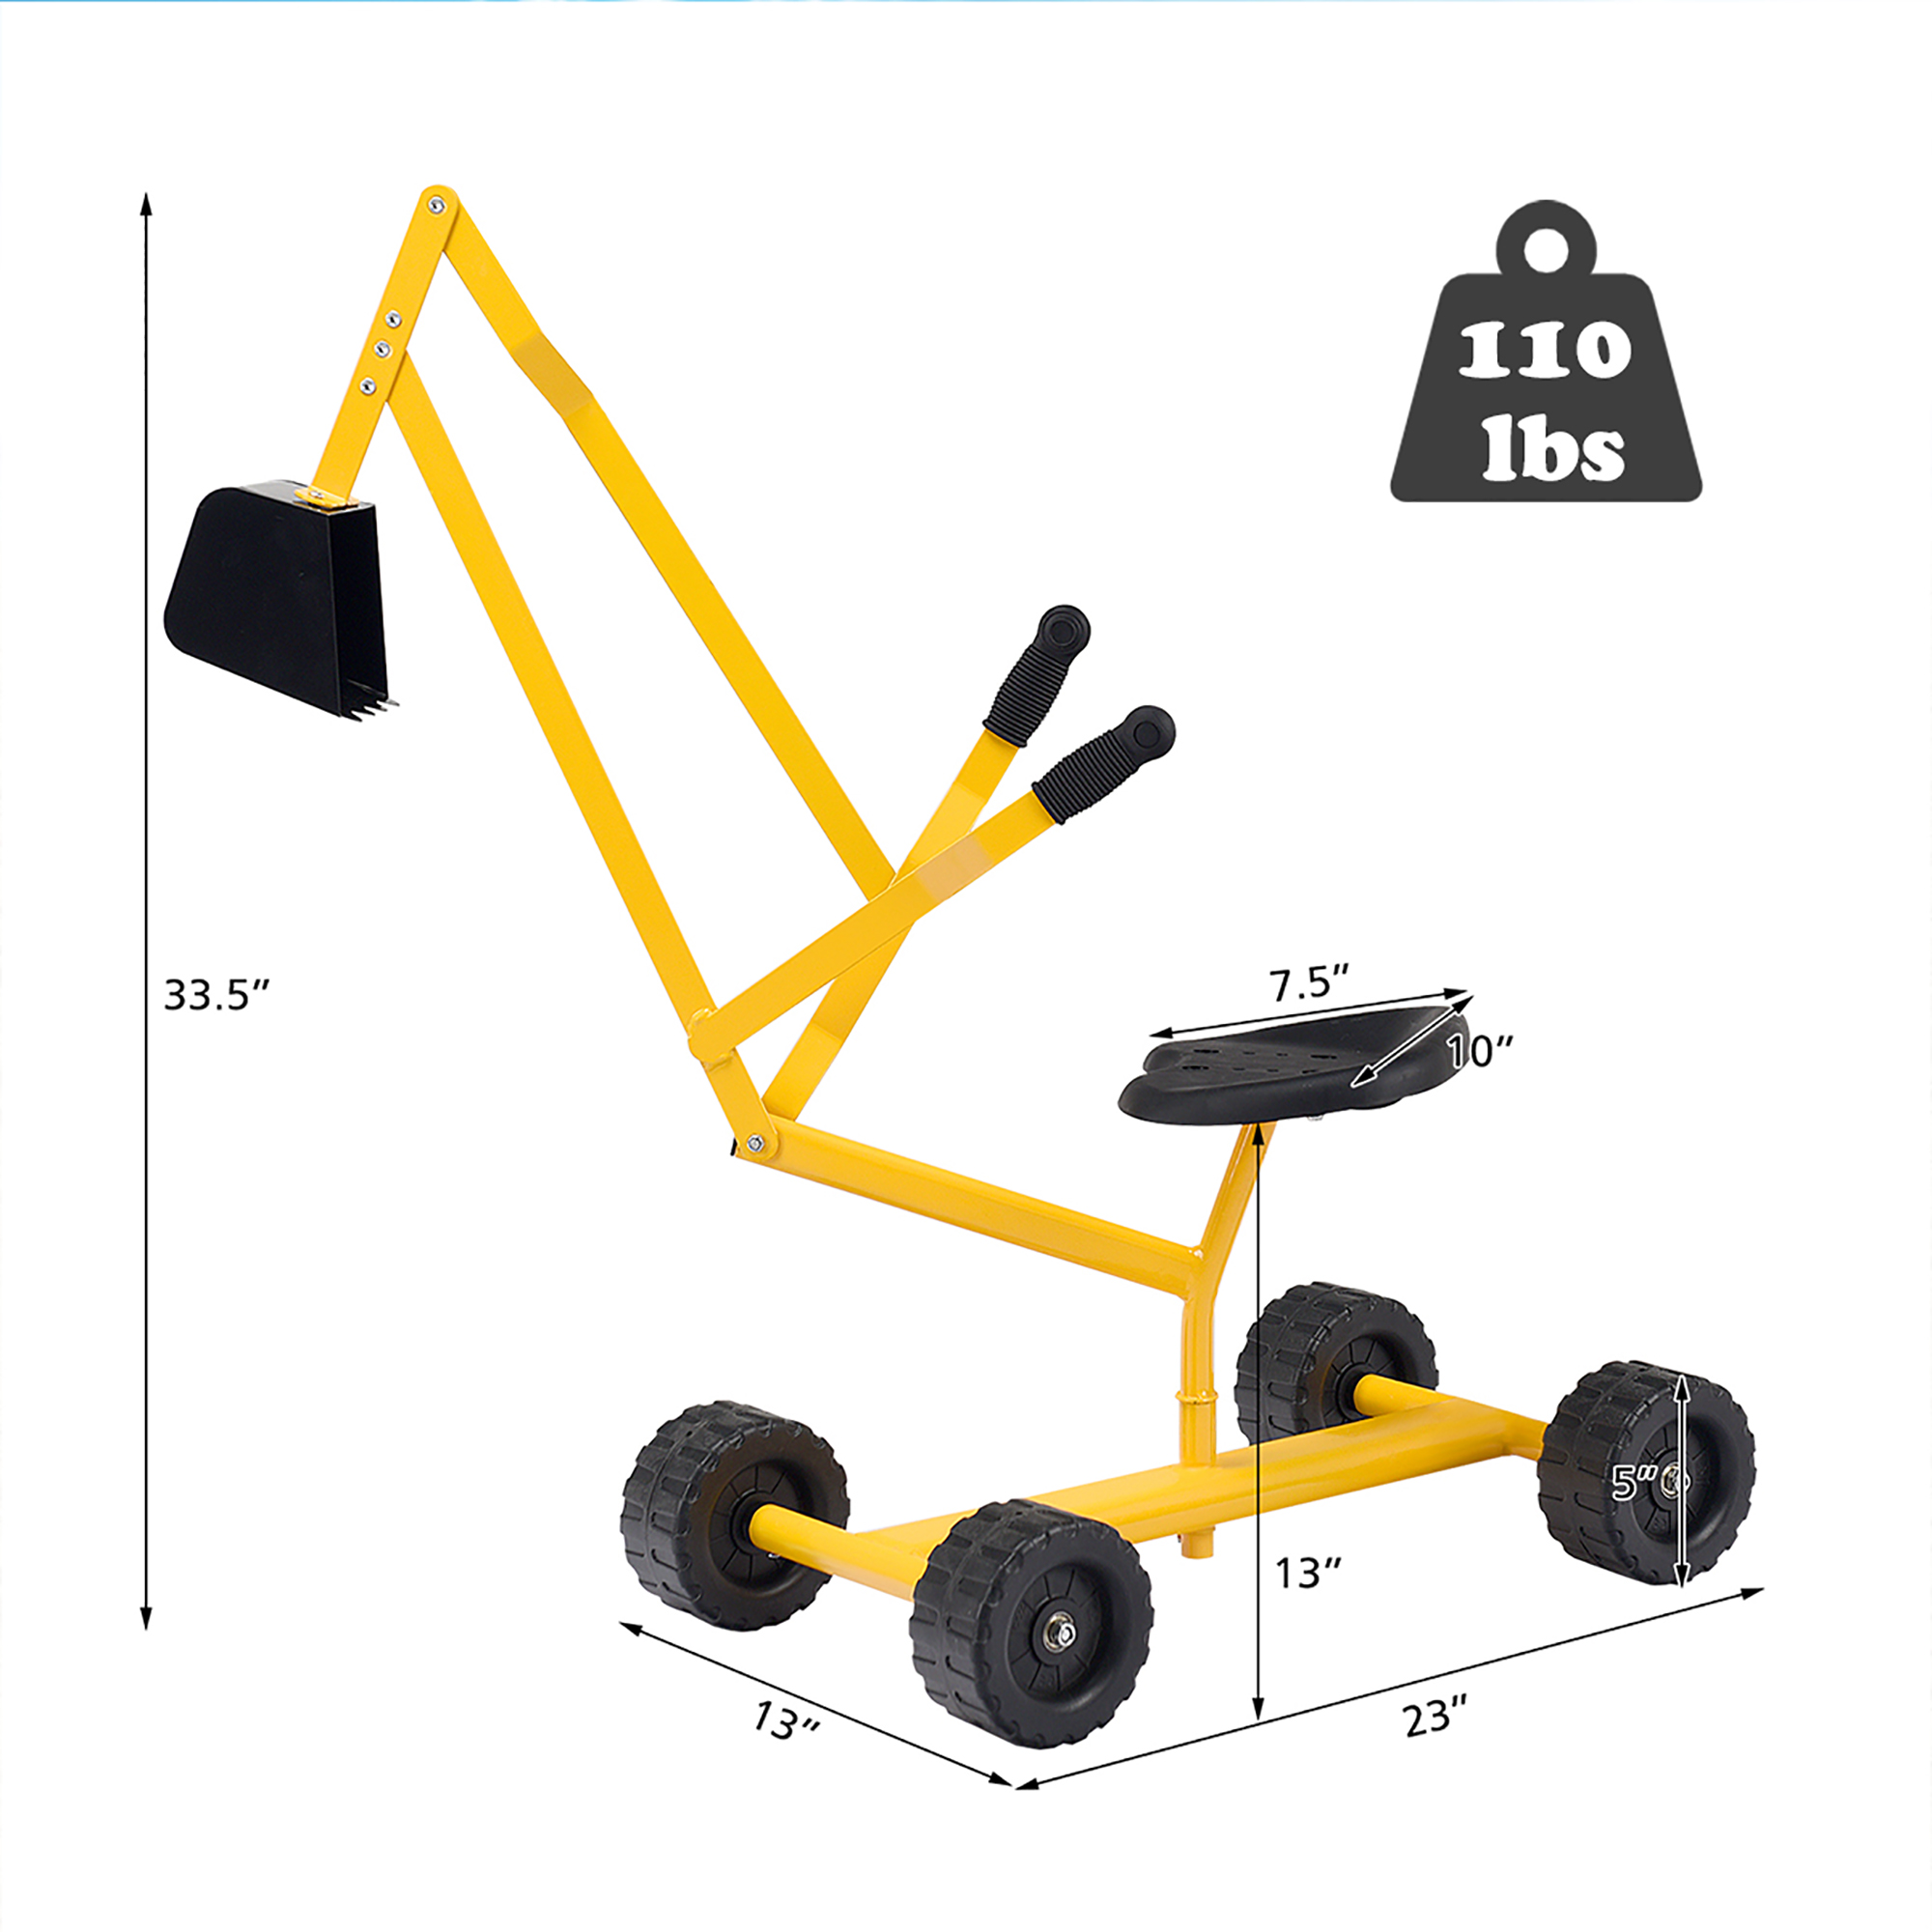 Costway Heavy Duty Kid Ride-on Sand Digger Digging Scooper Excavator for Sand Toy Yellow - image 4 of 7